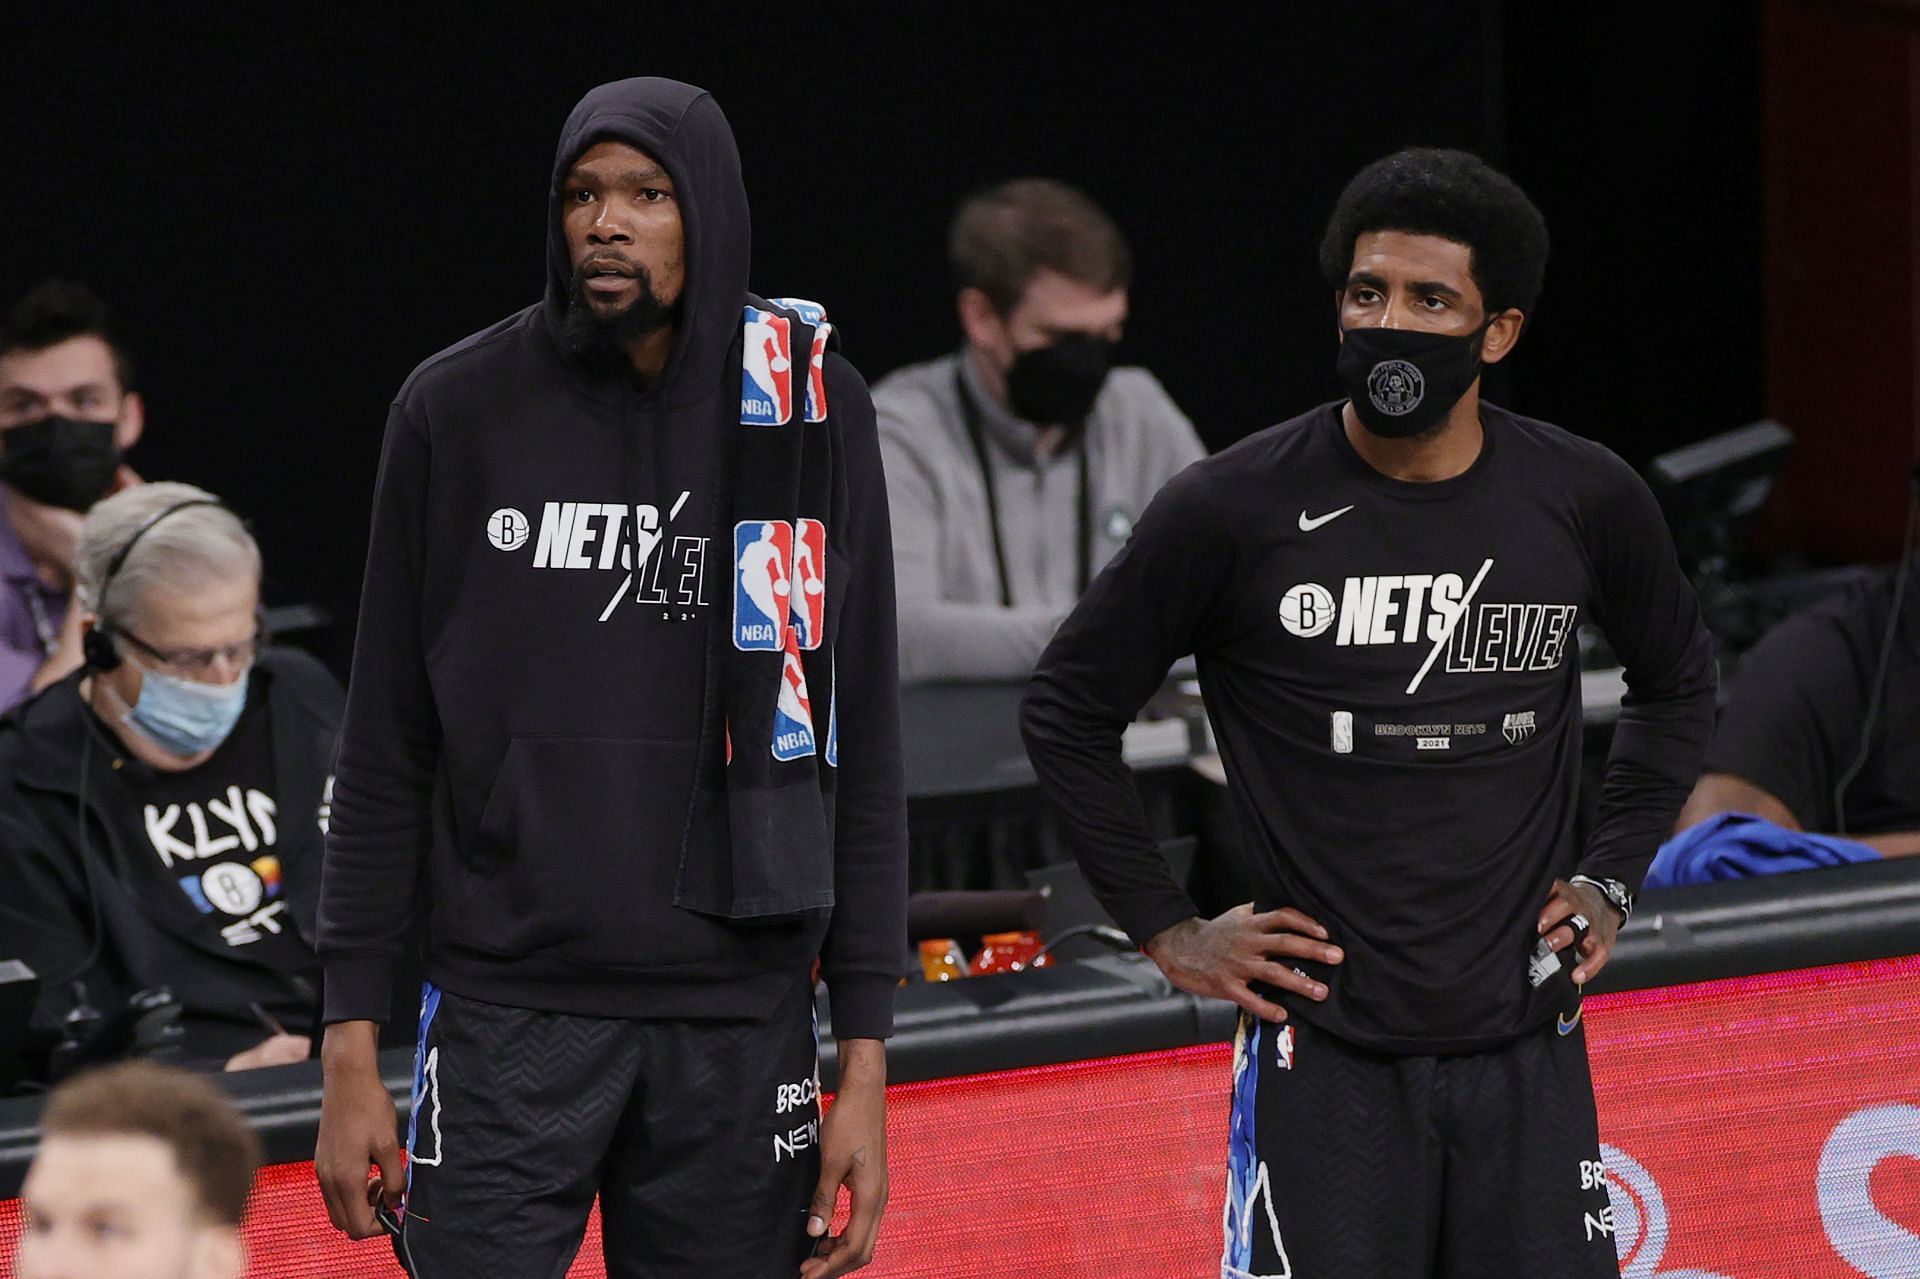 Brooklyn Nets superstars Kevin Durant and Kyrie Irving